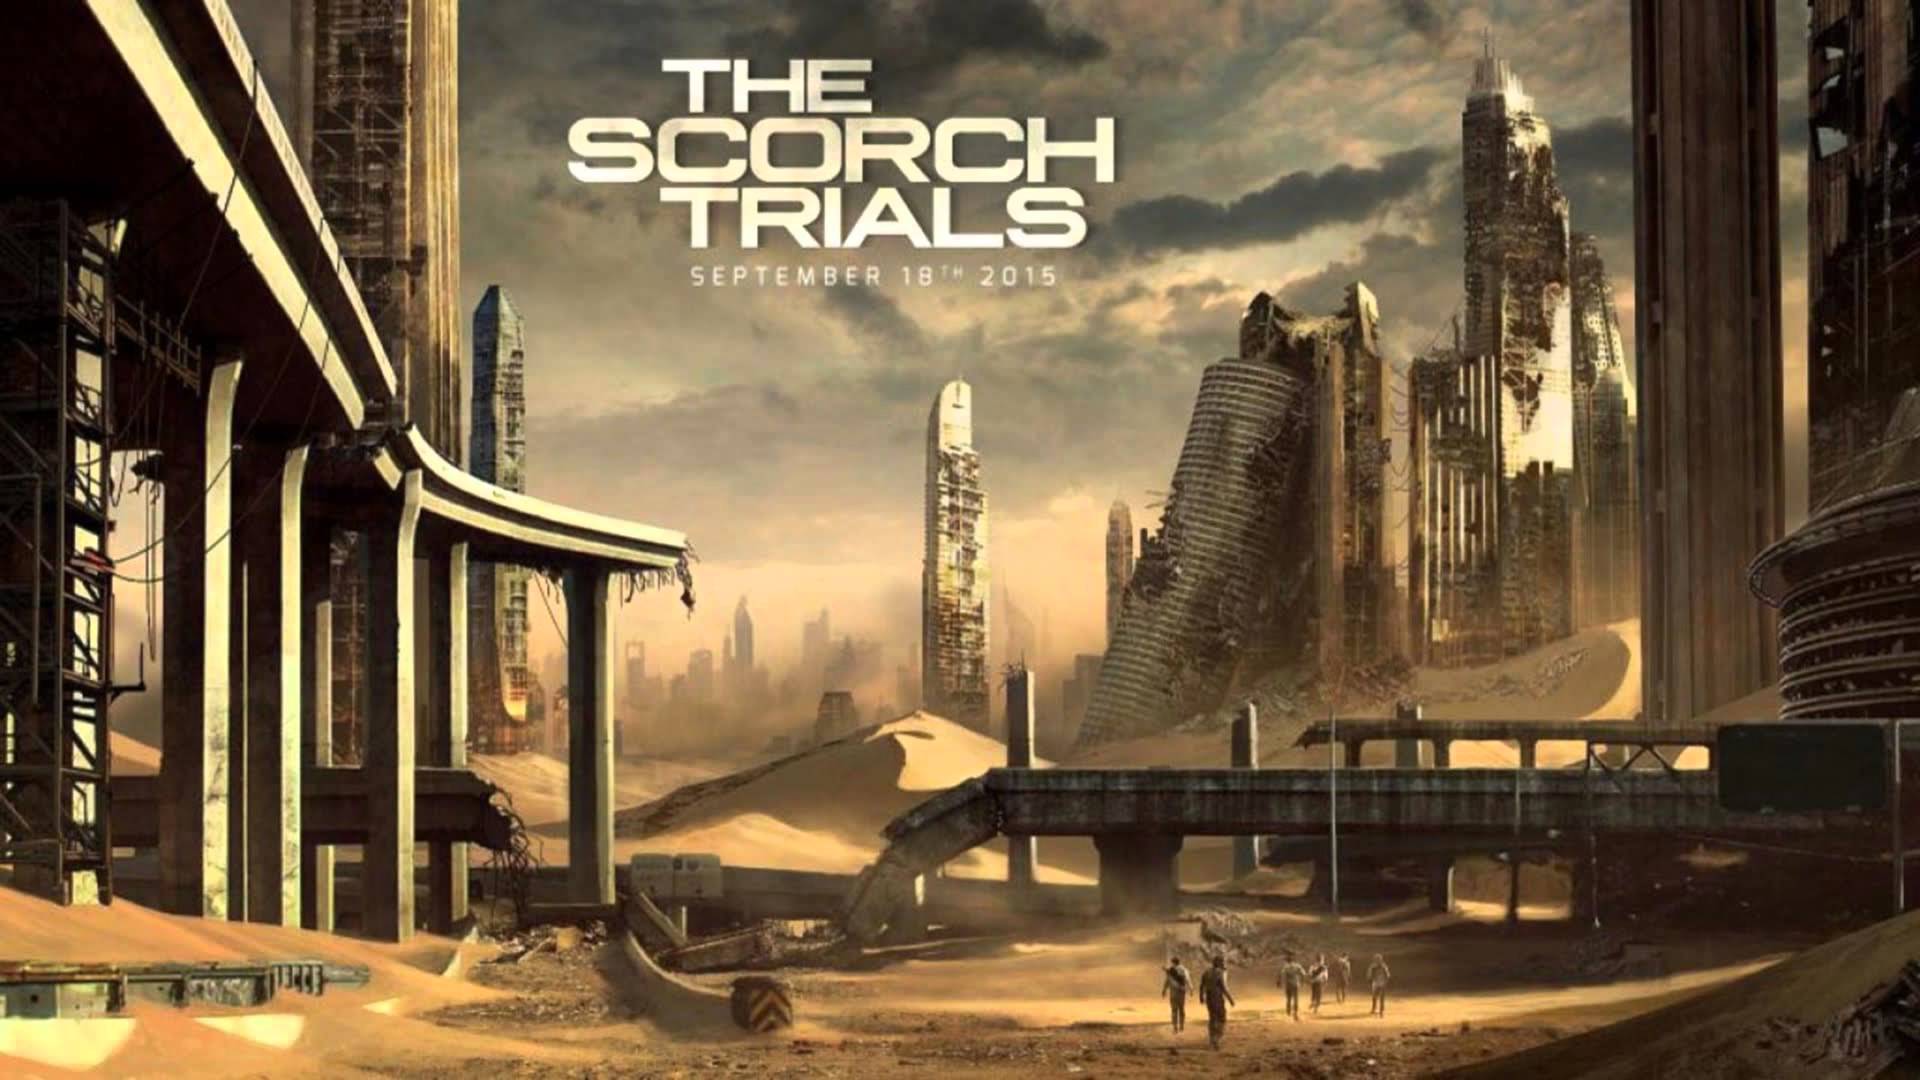 The Scorch Trials 2015 Movie Review